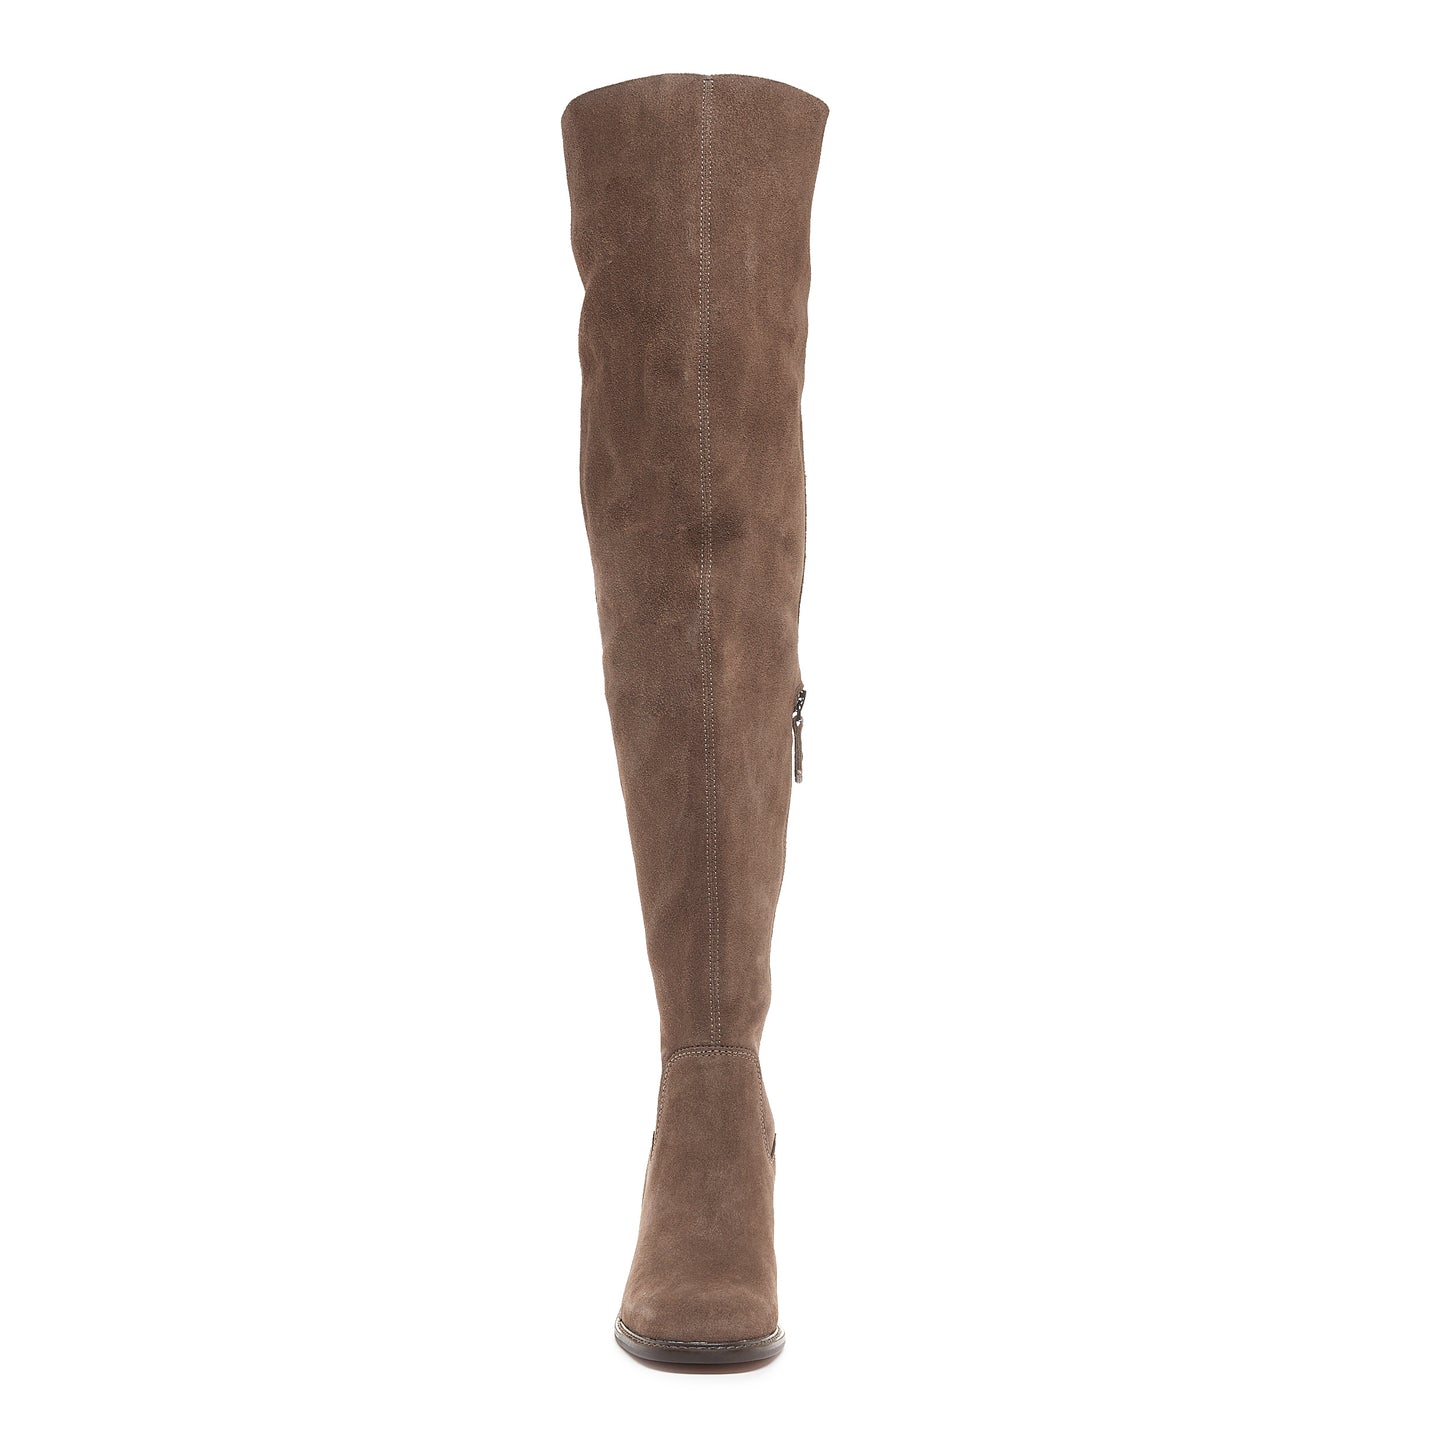 Logan Taupe Wide Calf Boots